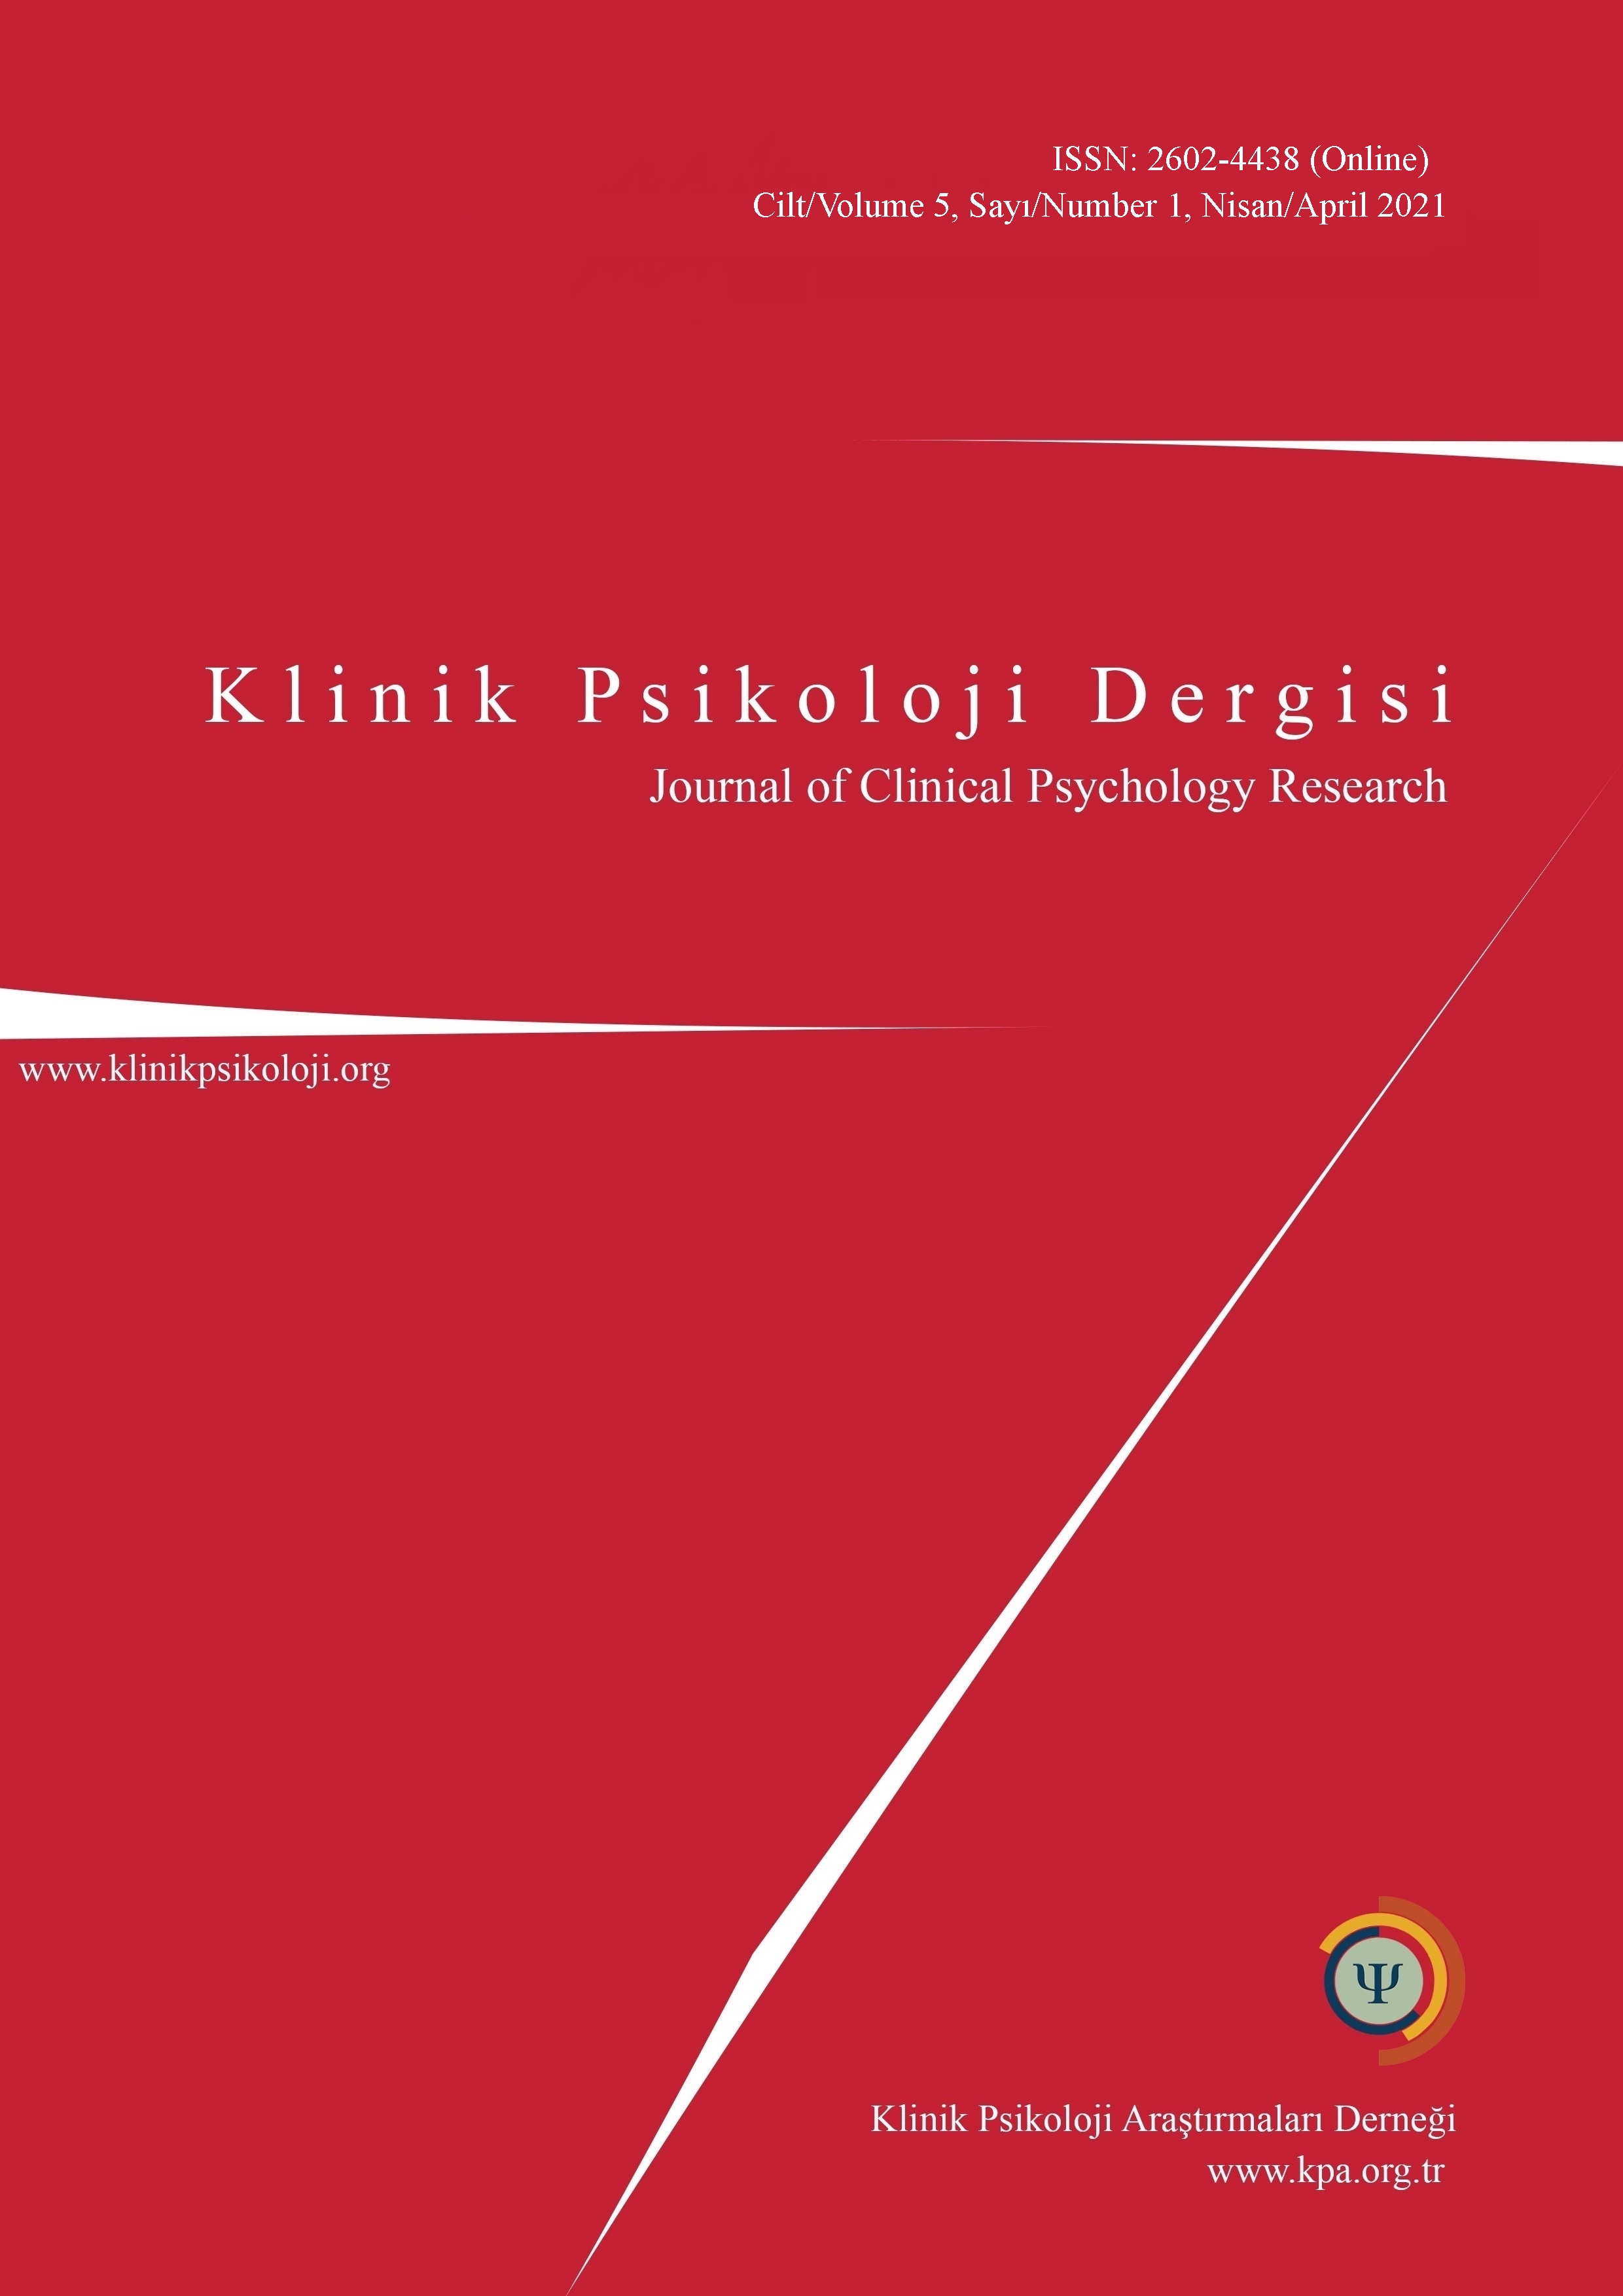 Adaptation of Self-Critical Rumination Scale into Turkish and investigation of its psychometric properties. Cover Image